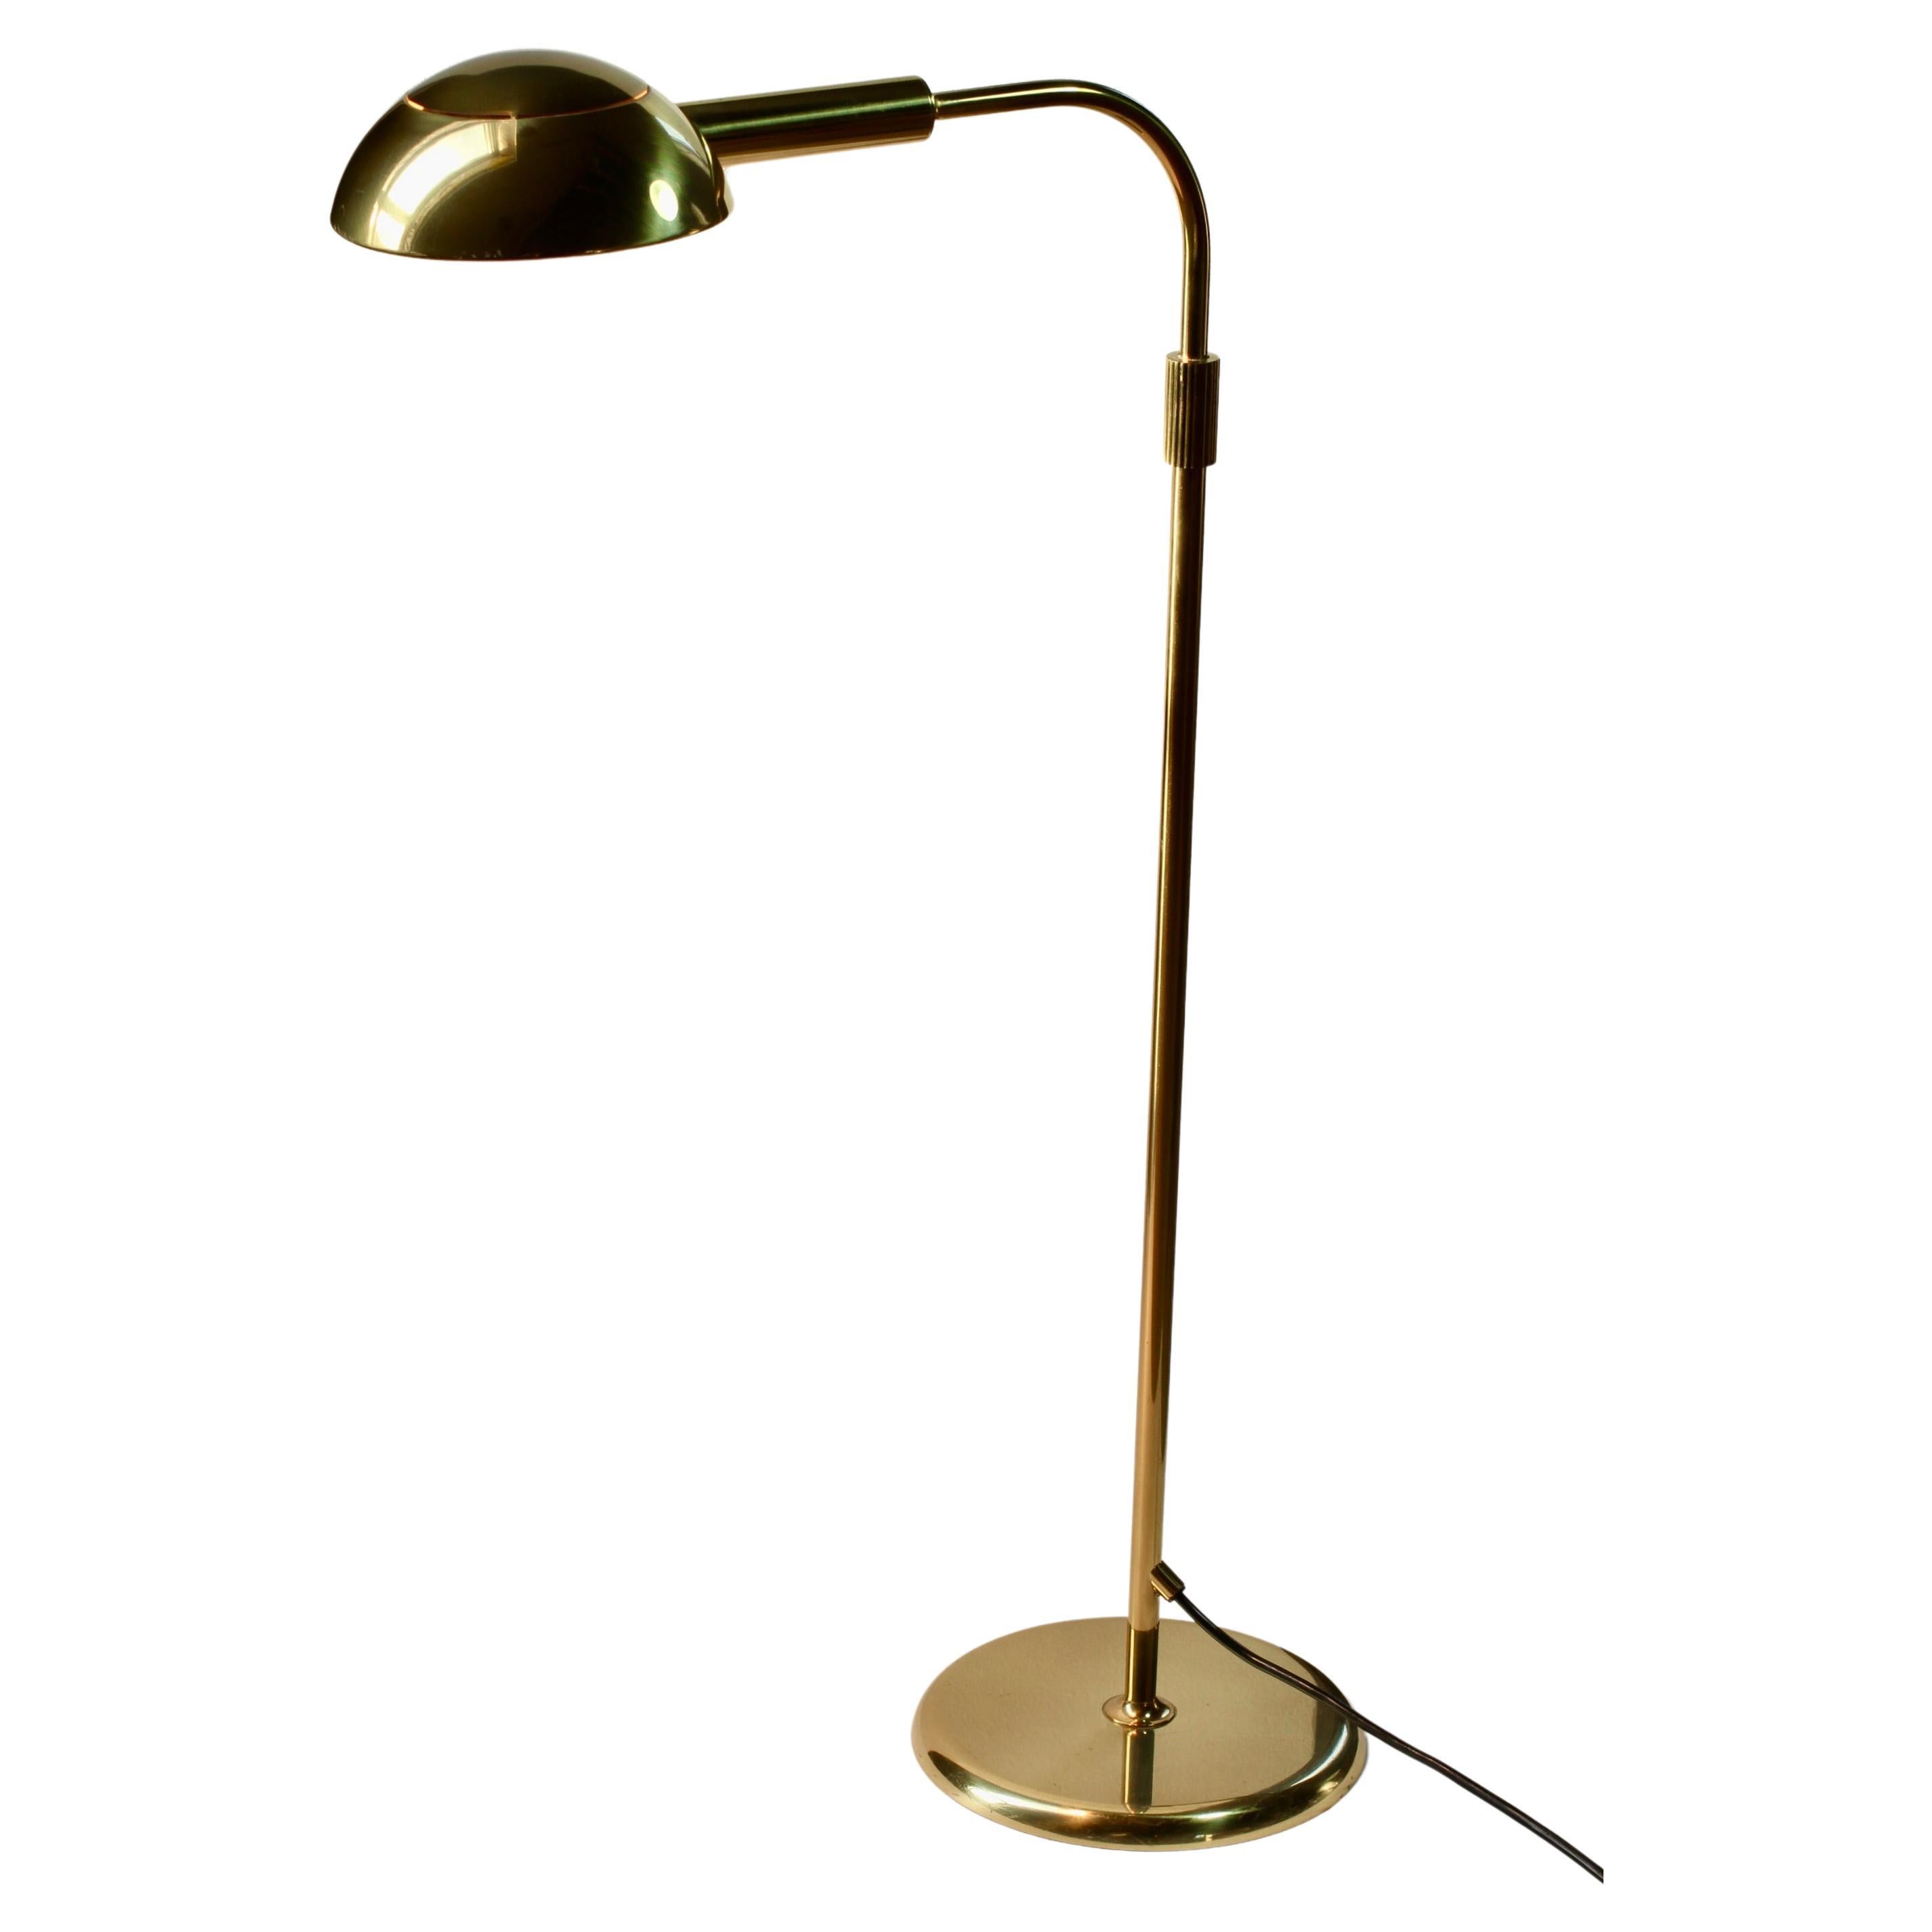 Polished Florian Schulz Mid-Century Vintage Modernist Brass 1970s Dimmable Floor Lamp For Sale